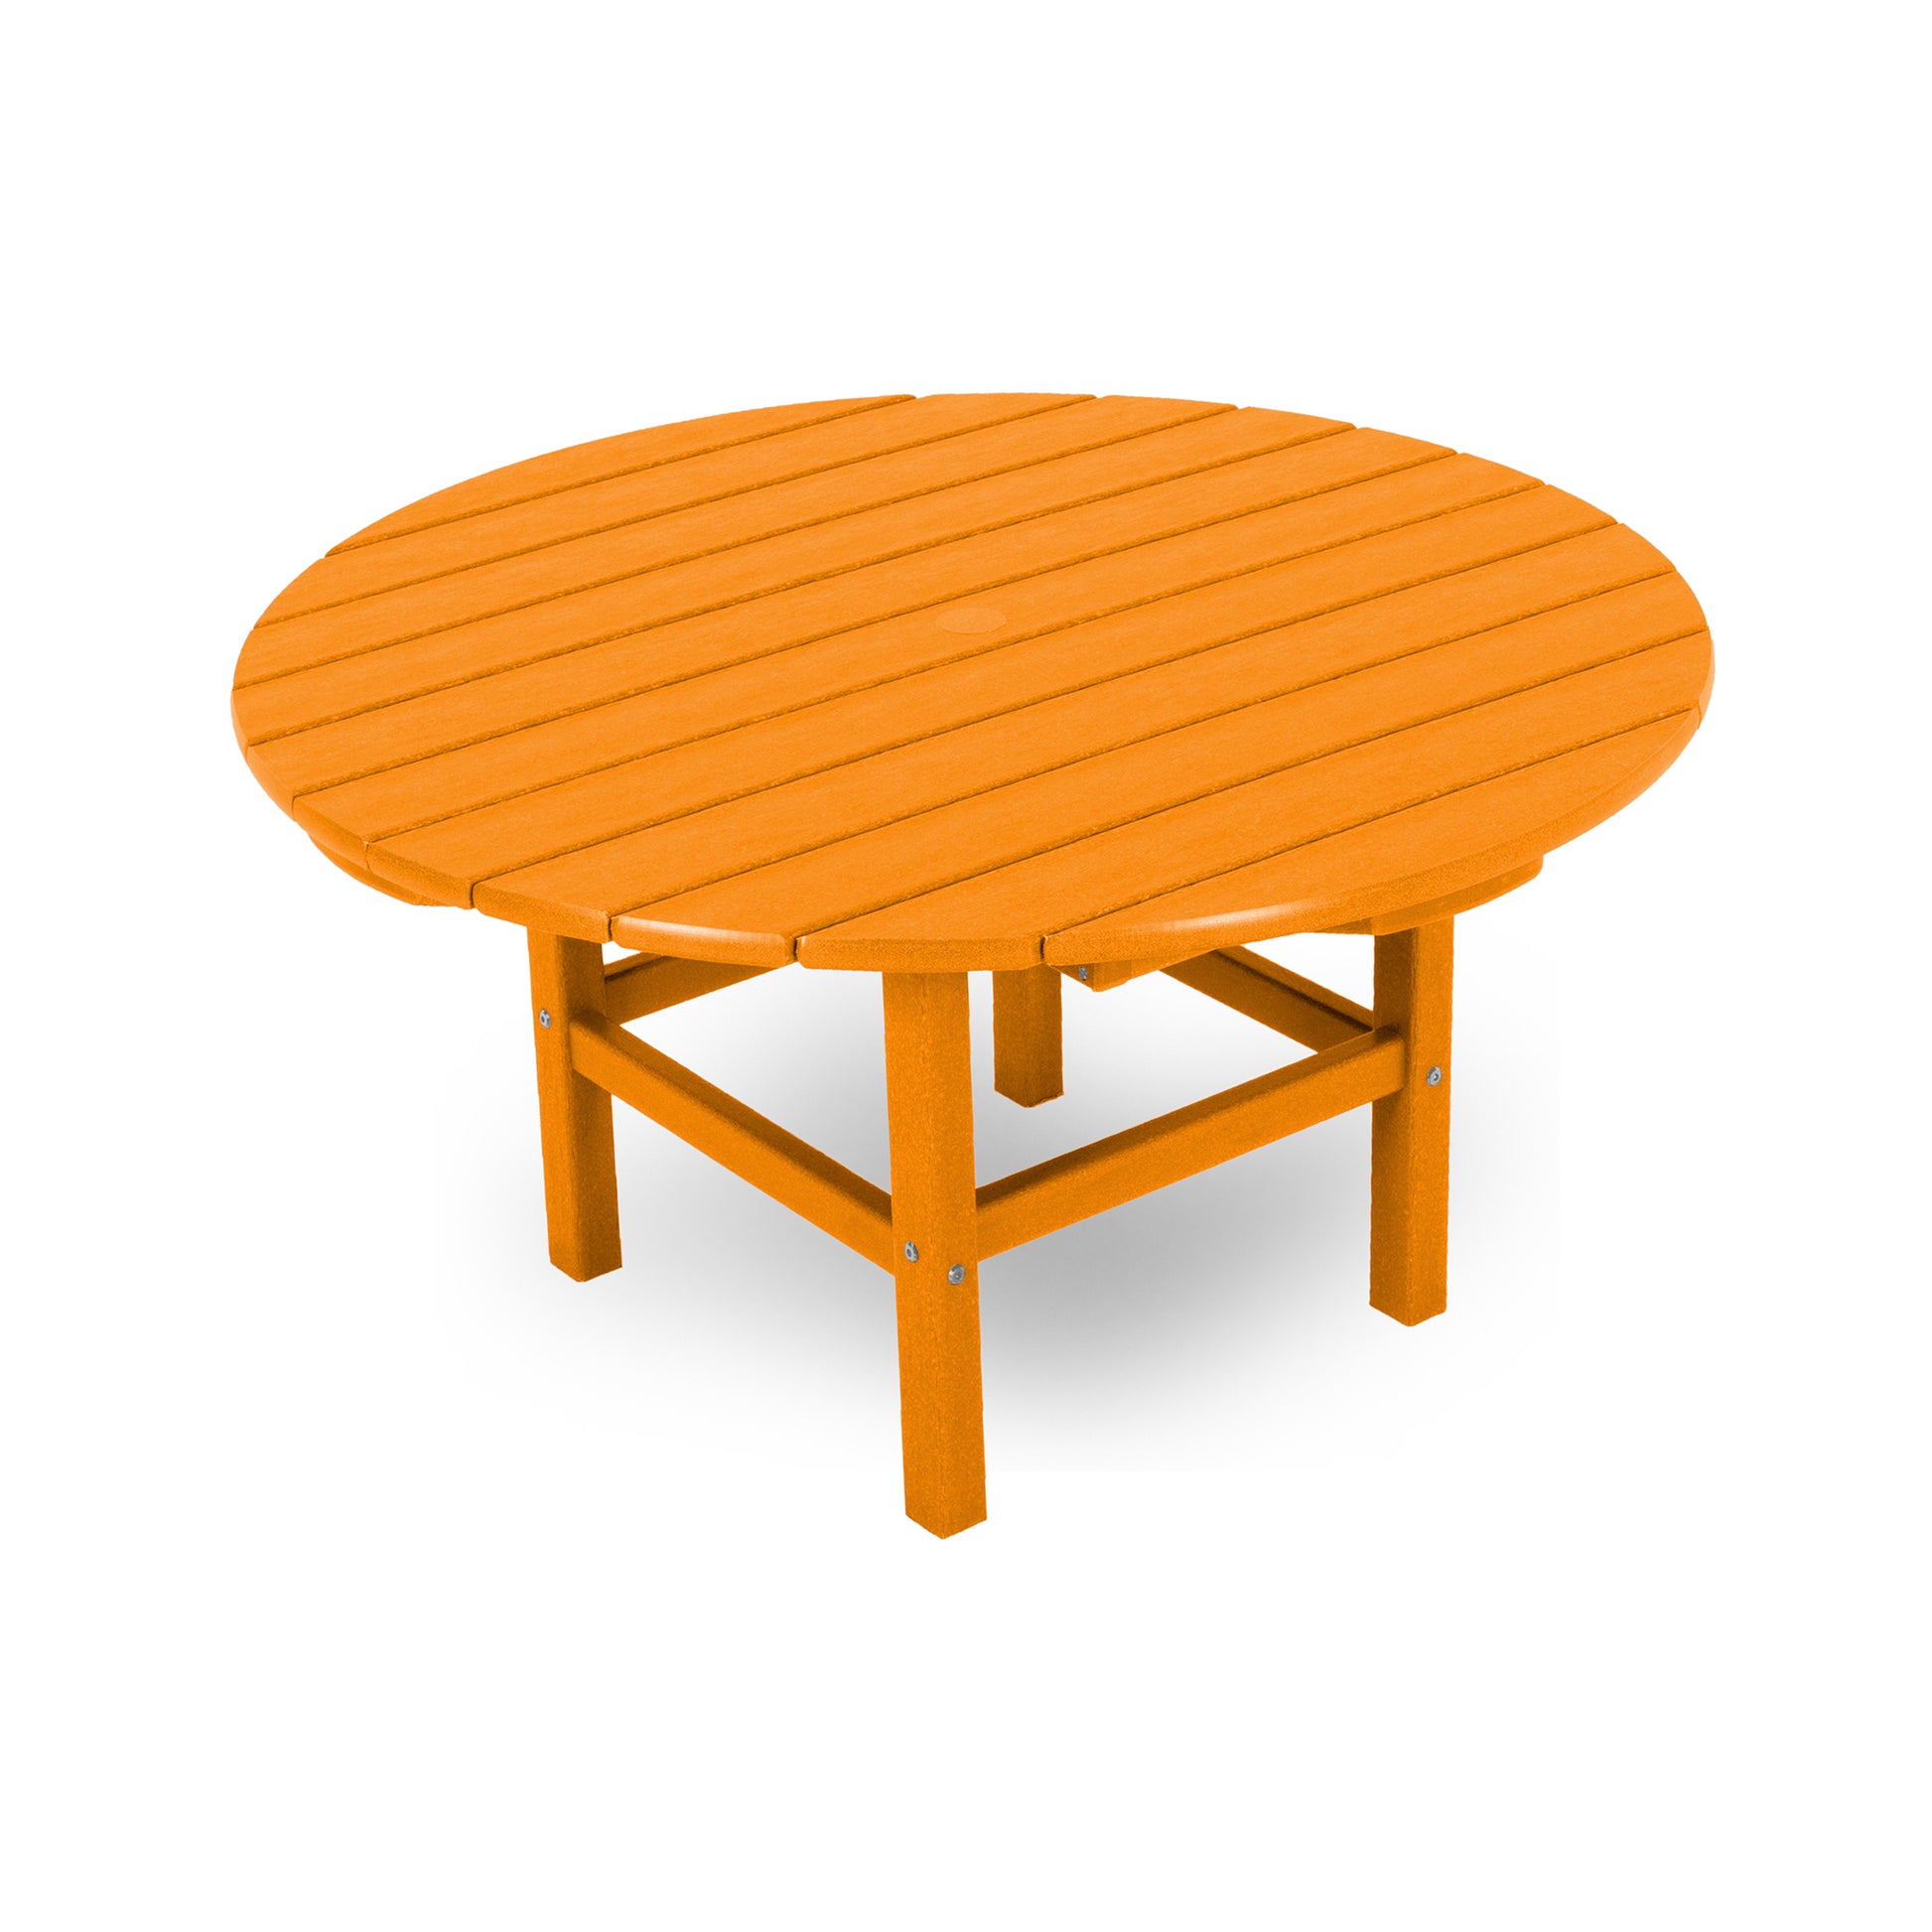 A round, orange POLYWOOD Outdoor 38" Conversation Table with a simple leg structure, isolated on a white background.